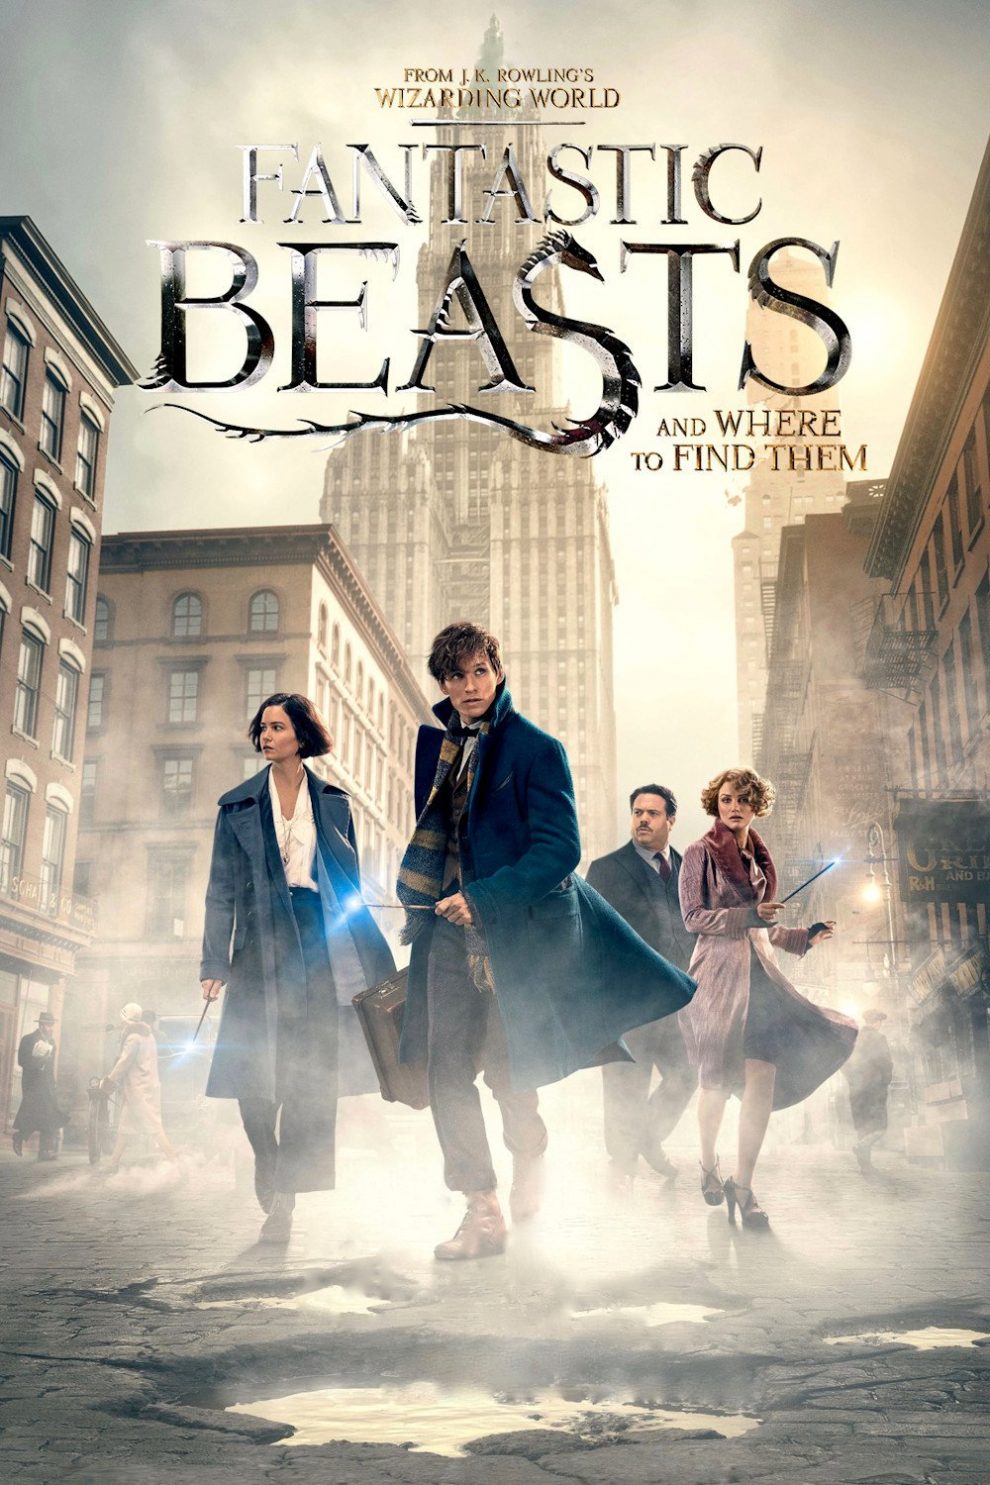 Poster for the movie "Fantastic Beasts and Where to Find Them"